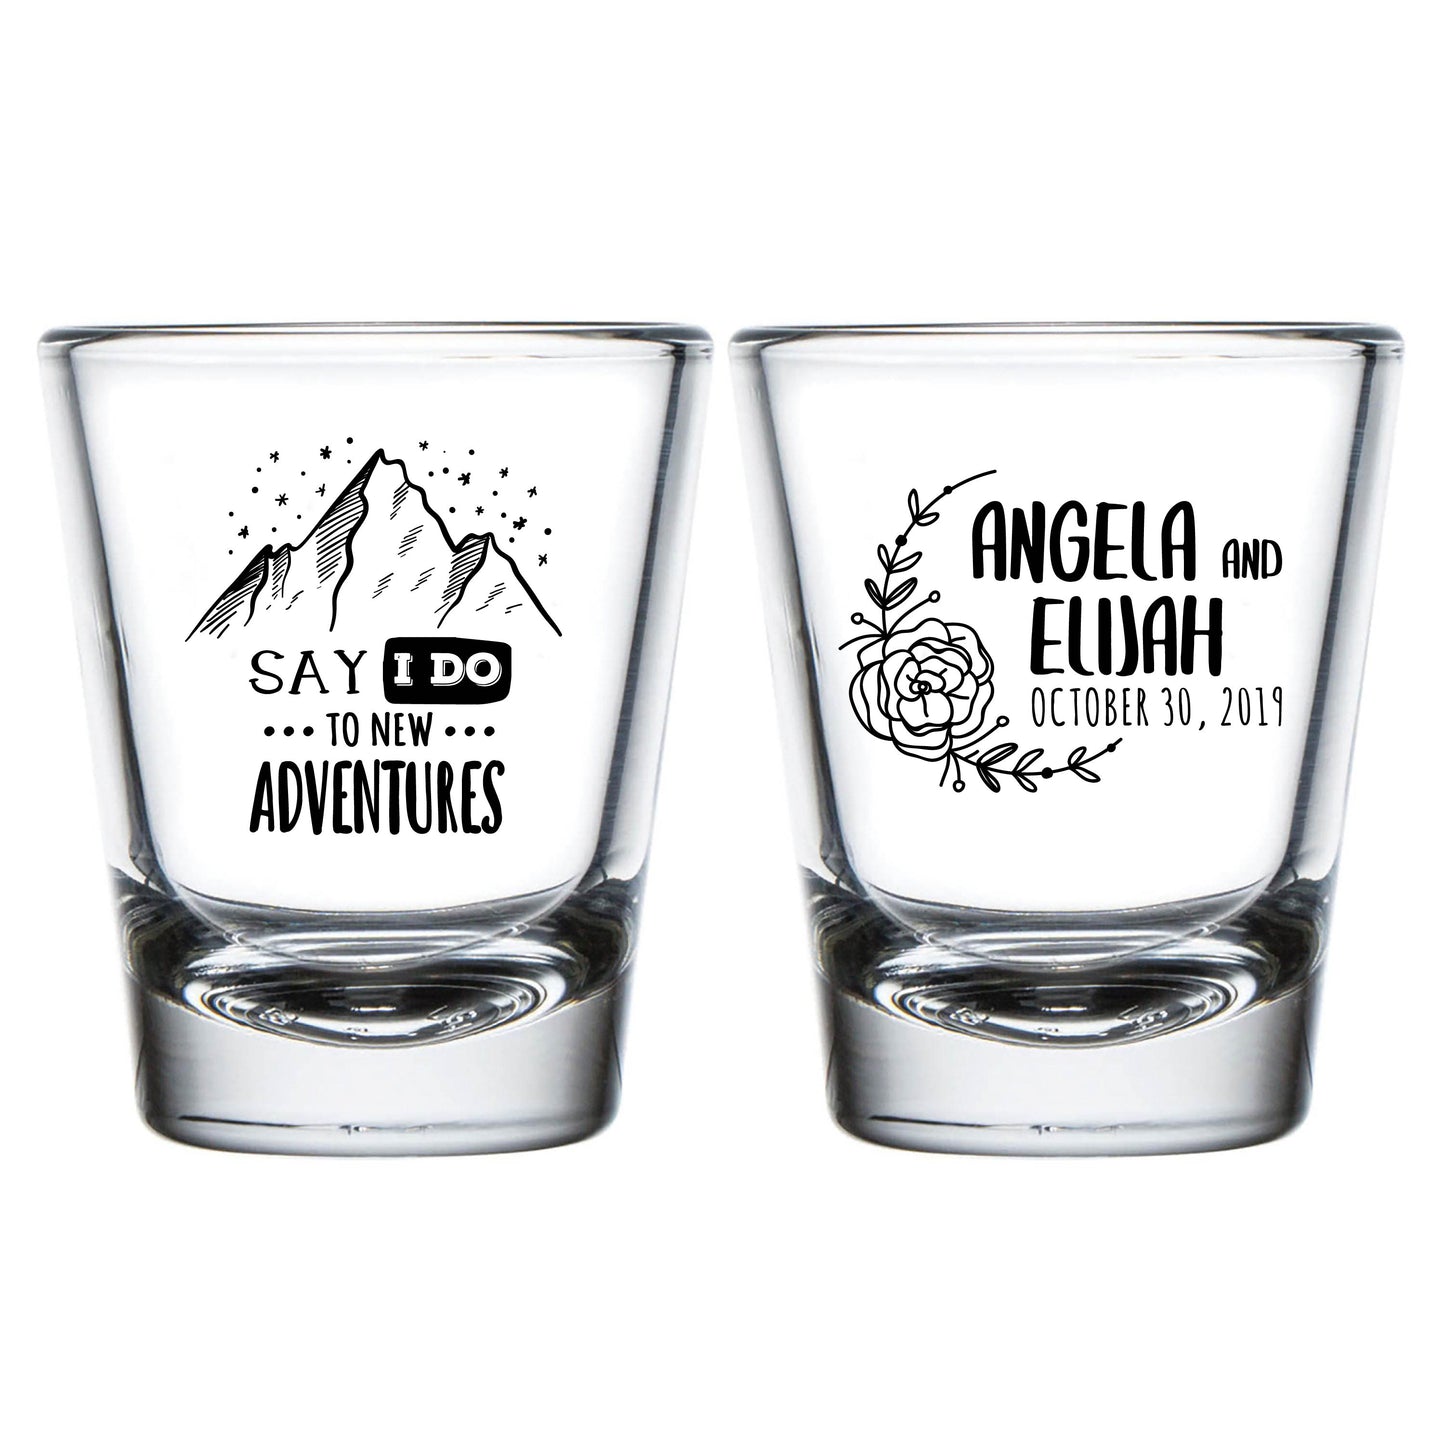 Personalized Printed Shot Glasses for Weddings (110)